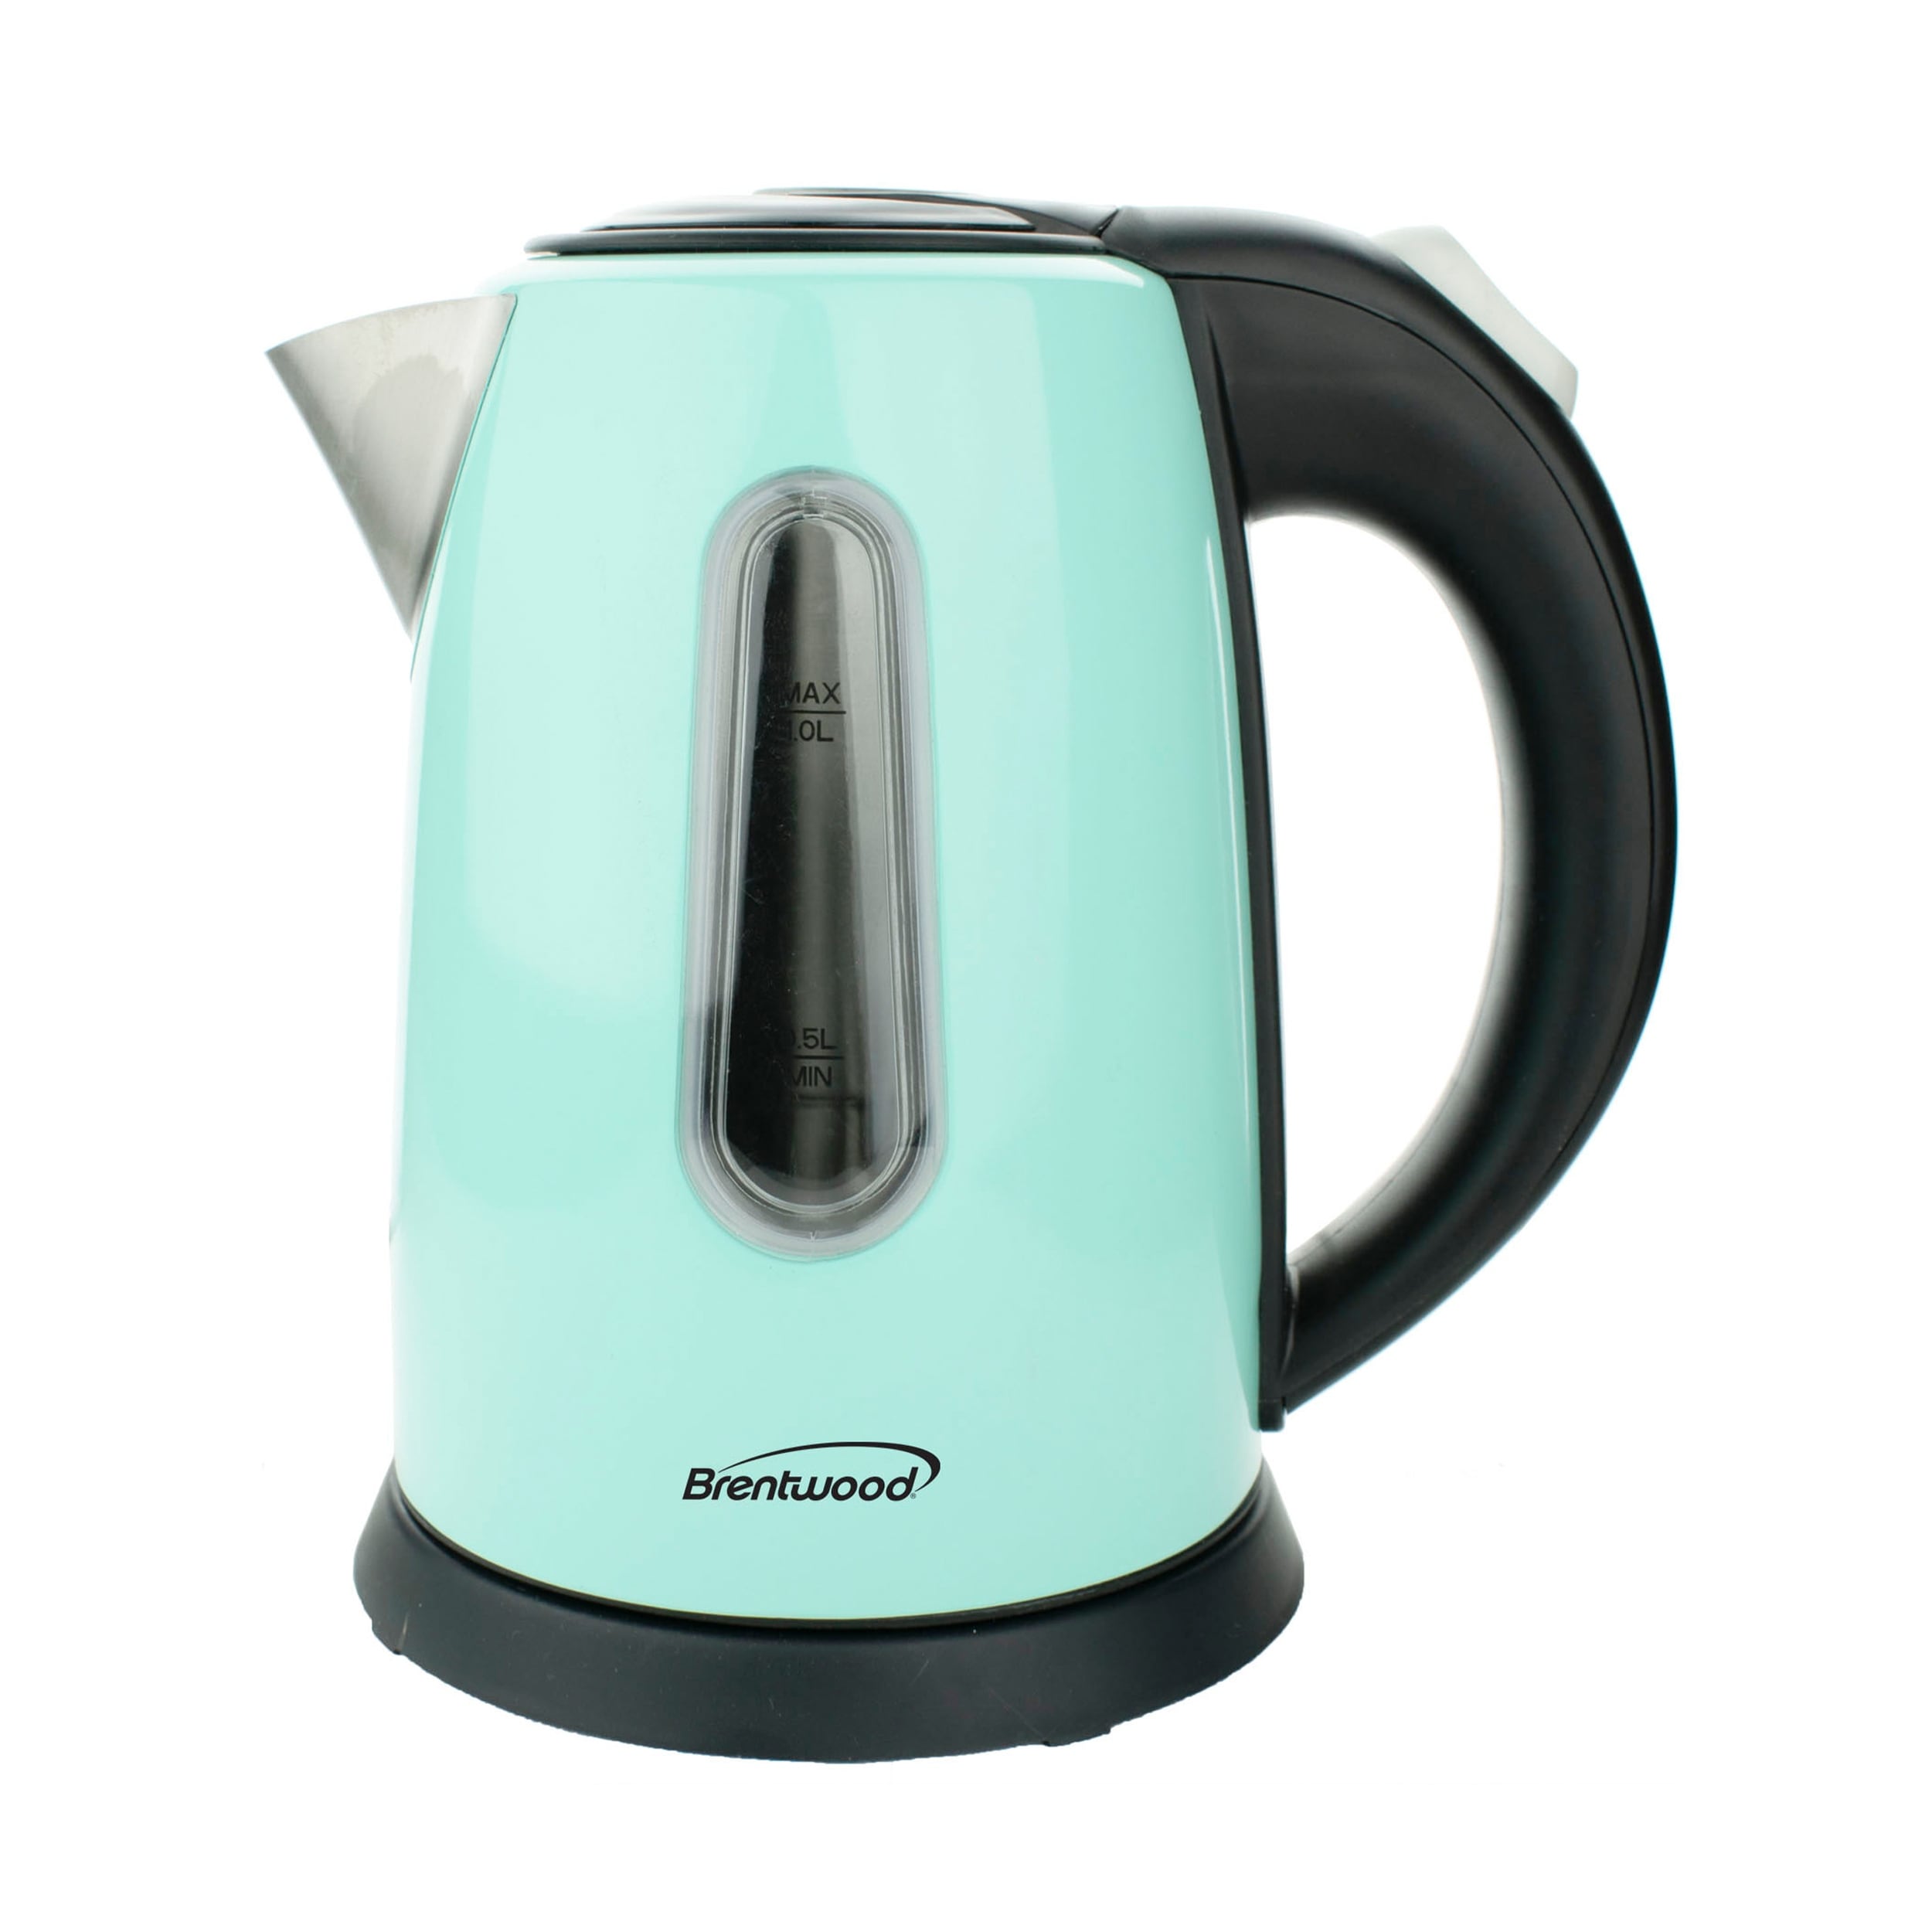 Haden Highclere 1.5-Liter Cordless Electric Kettle - Pool Blue